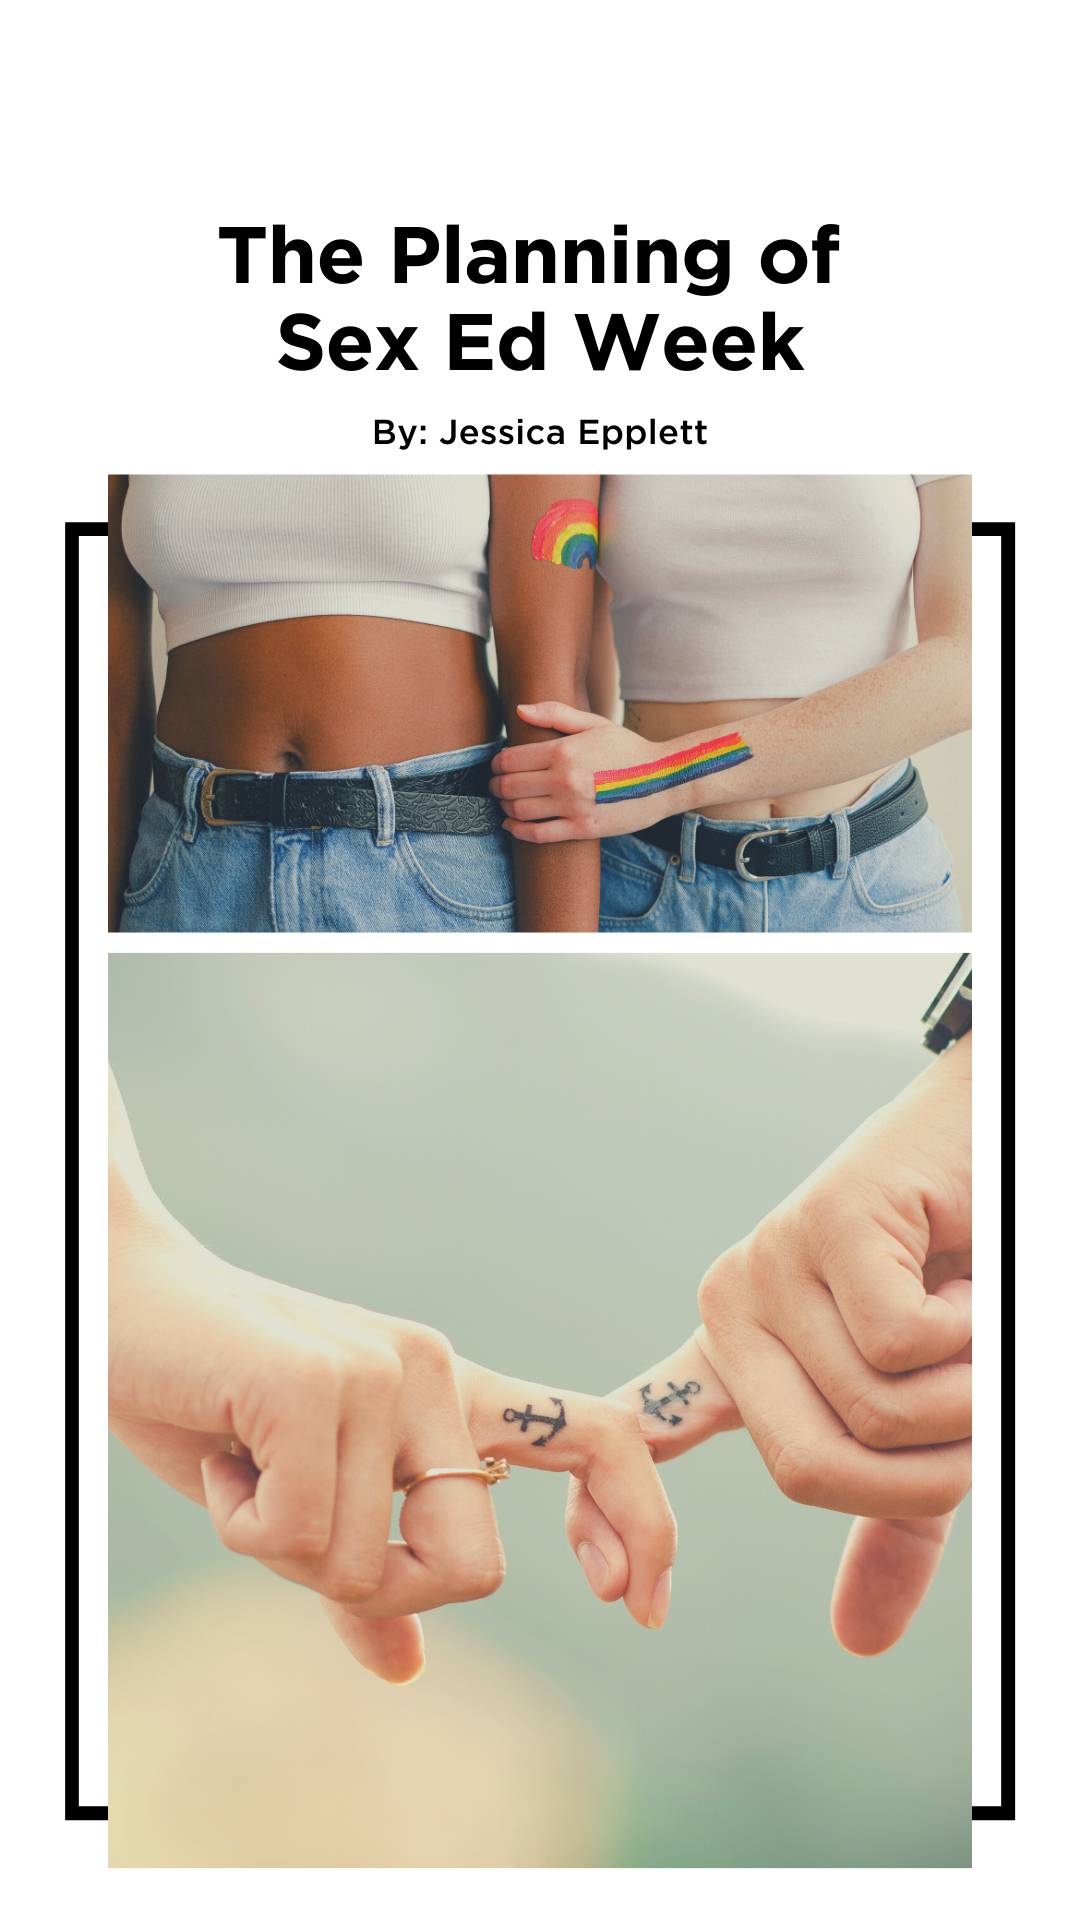 Image of title page that says "The Planning of Sex Ed Week" with an image of two people holding onto each other with rainbow tatoos and an image of two hands holding with anchor tatoos on the each person's finger.